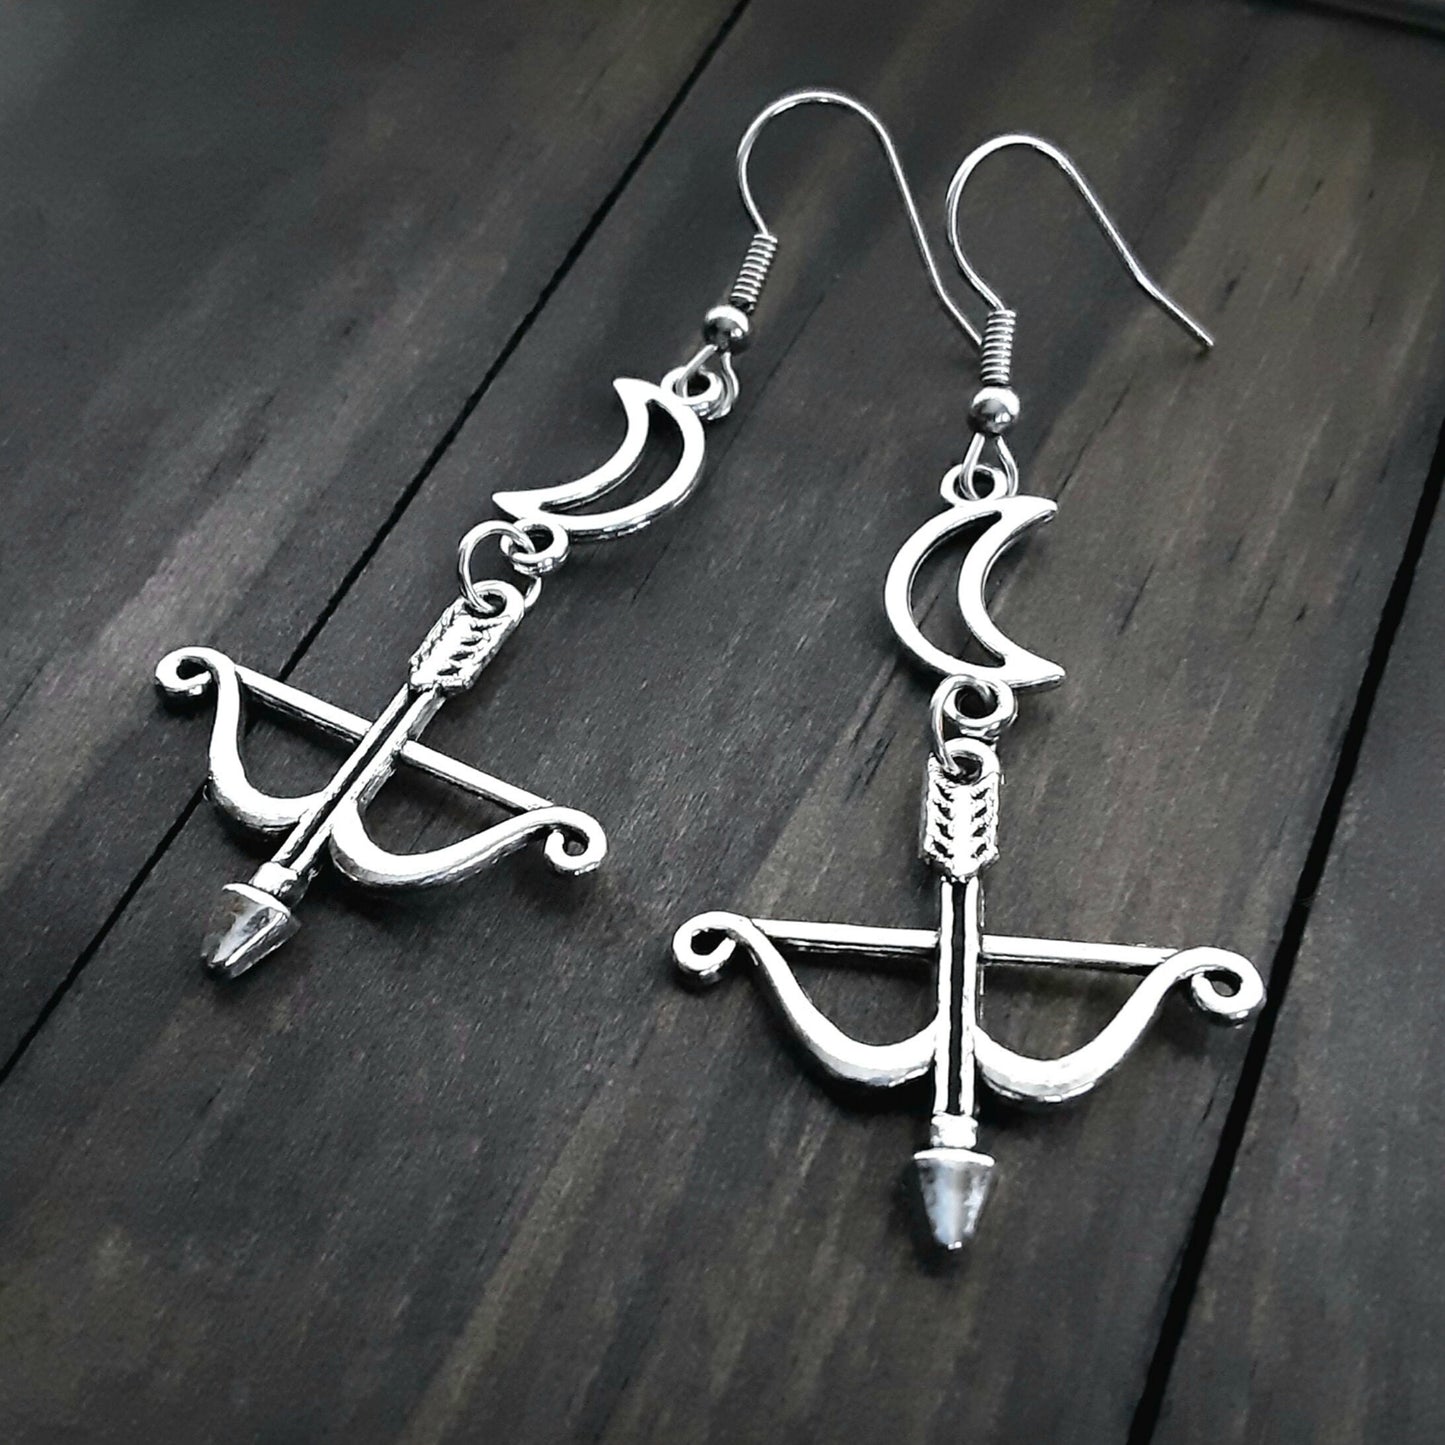 Artemis earrings Greek Goddess of the Hunt Bow and arrow with crescent moon charms Sagittarius jewelry Pagan Dedication Gift Idea